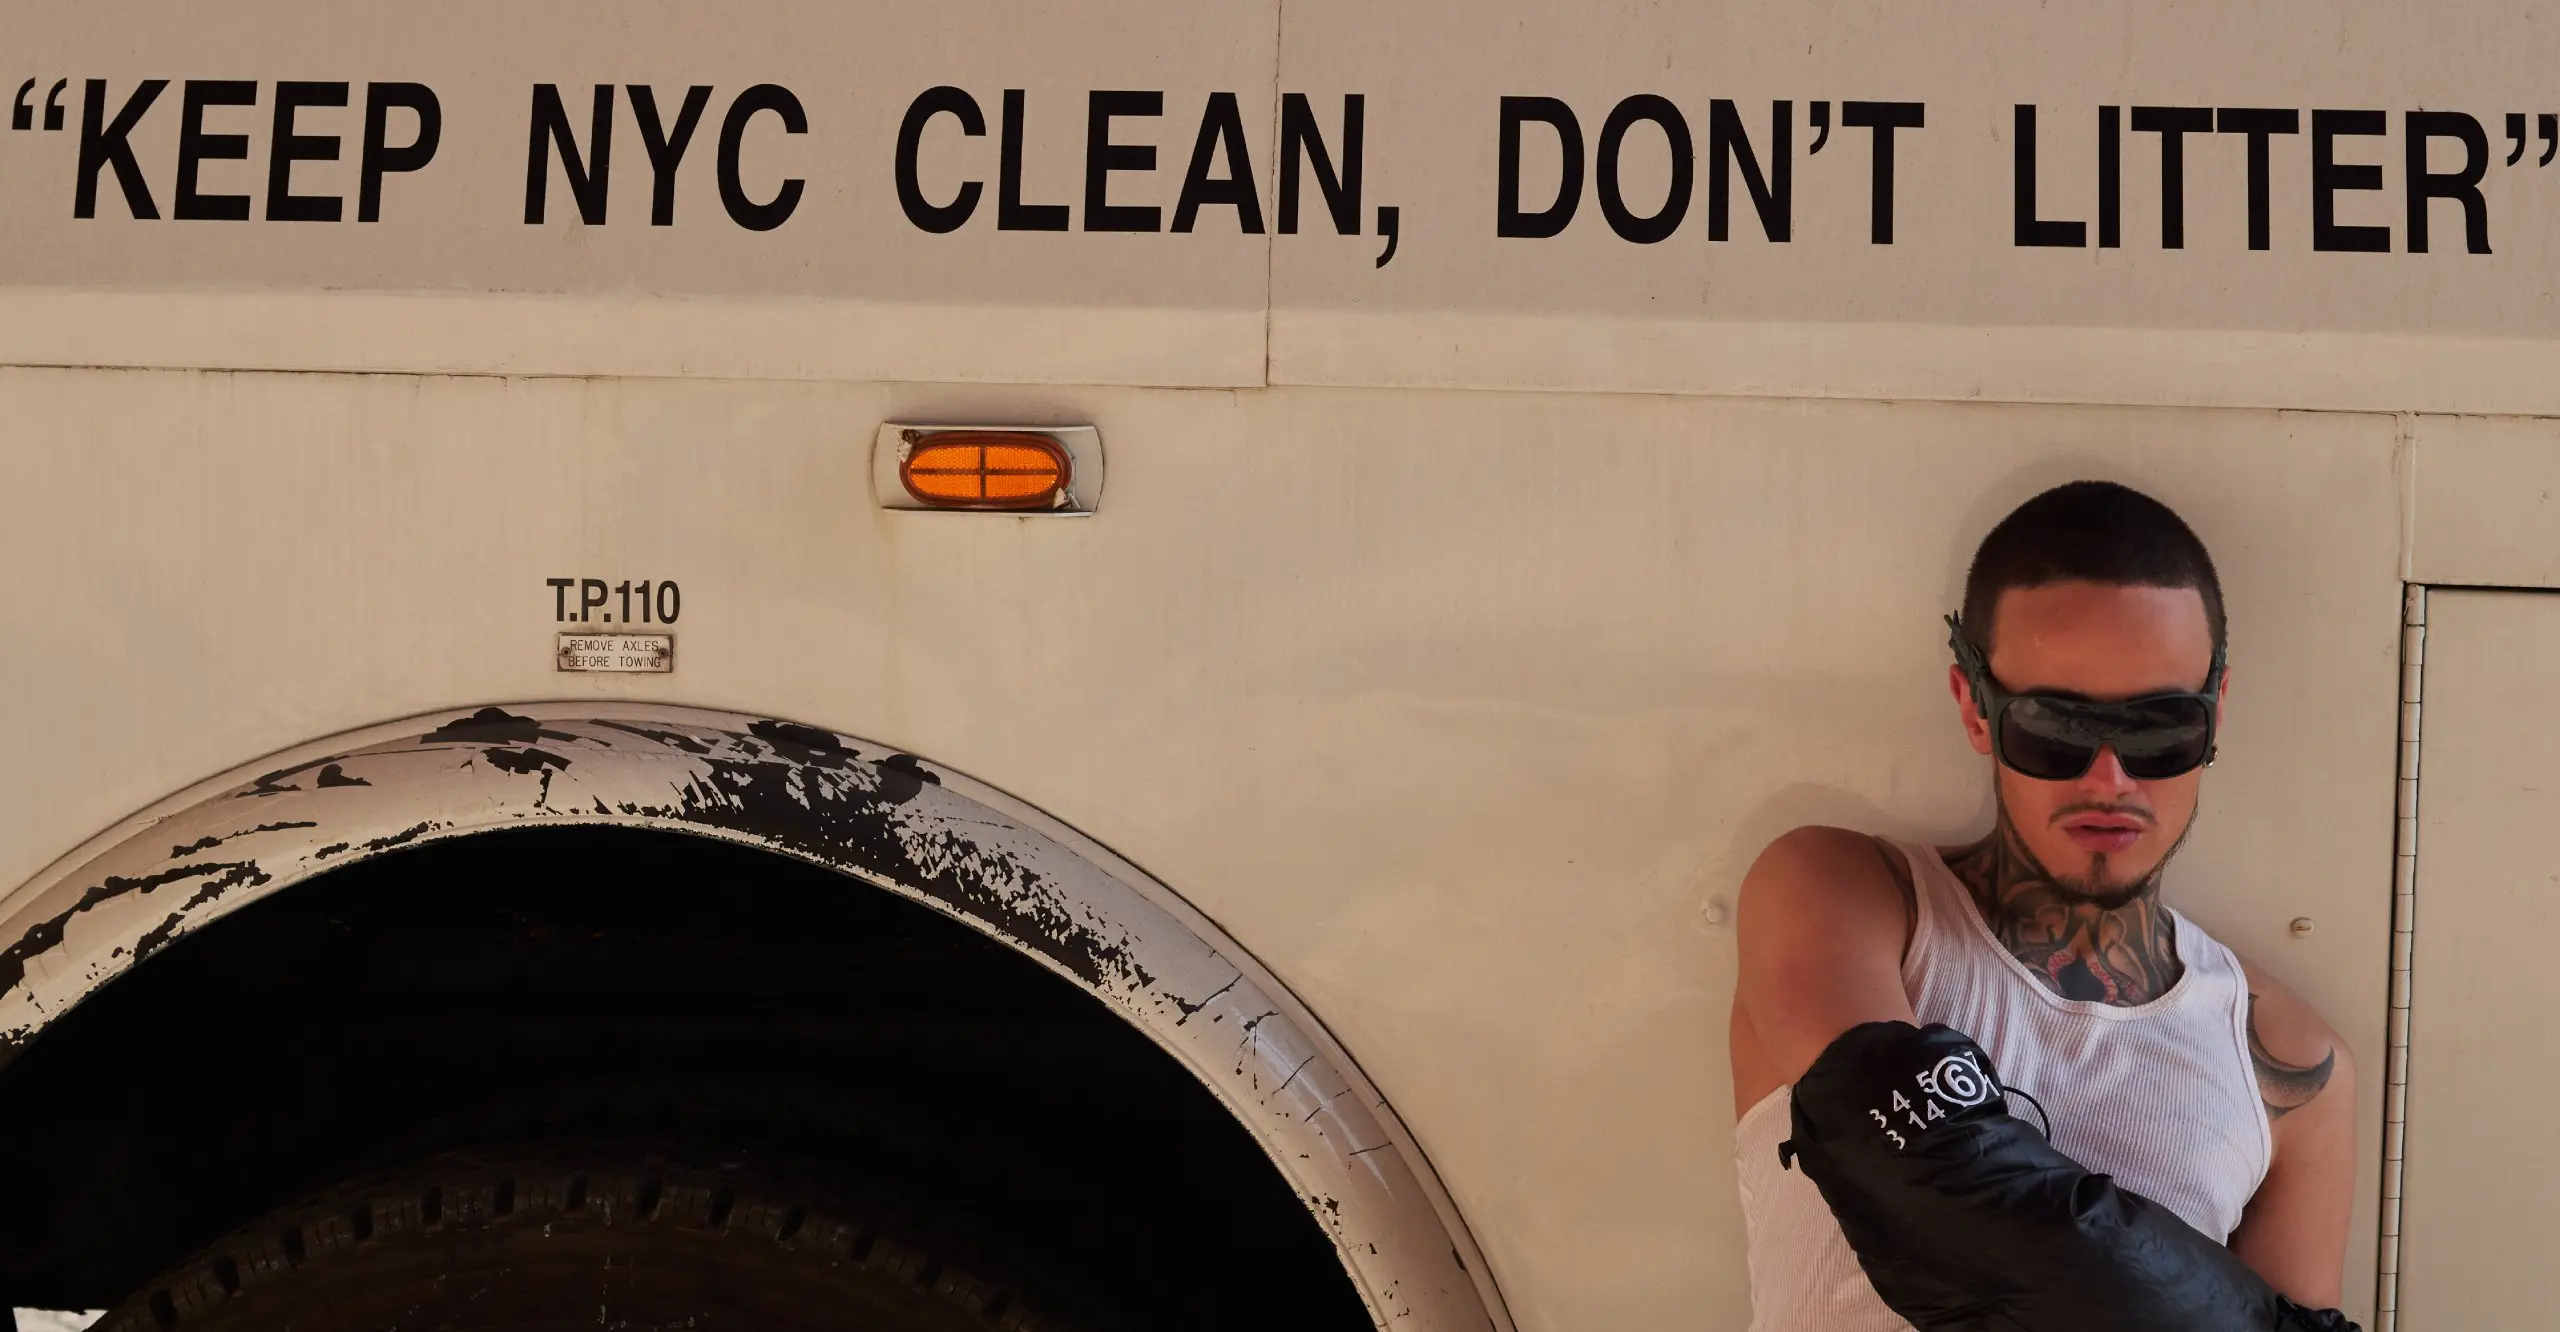 Colour photograph of a person sitting against the side of a vehicle with the words 'Keep NYC Clean, Don't Litter' on the side of the vehicle